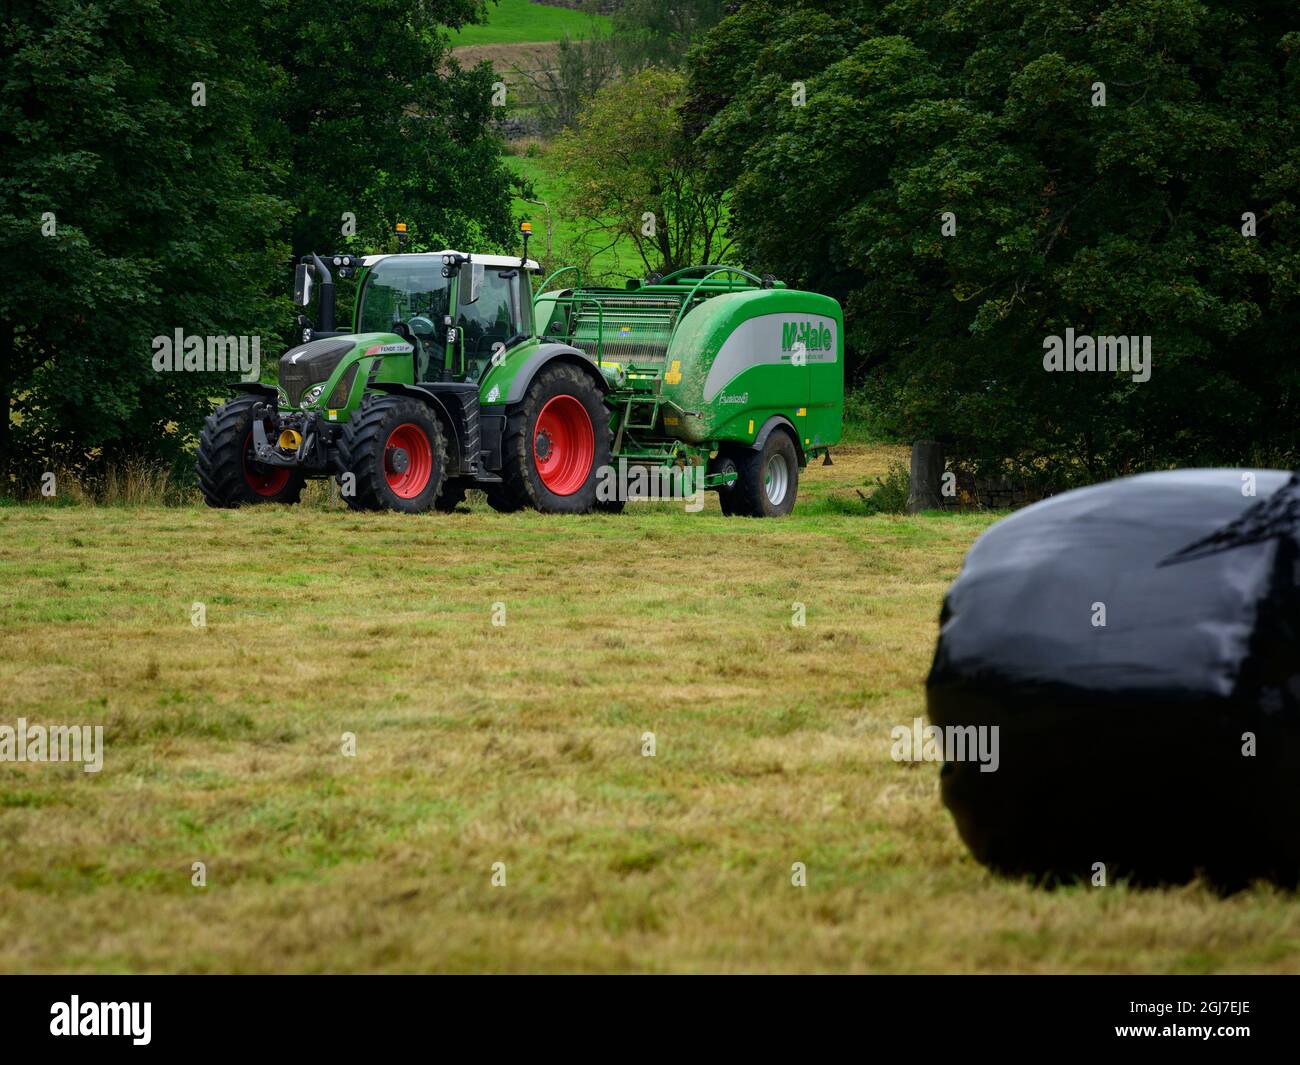 Hay or silage making (farmer in farm tractor at work in field, pulling baler, collecting dry grass & round black bale wrapped - Yorkshire England, UK. Stock Photo